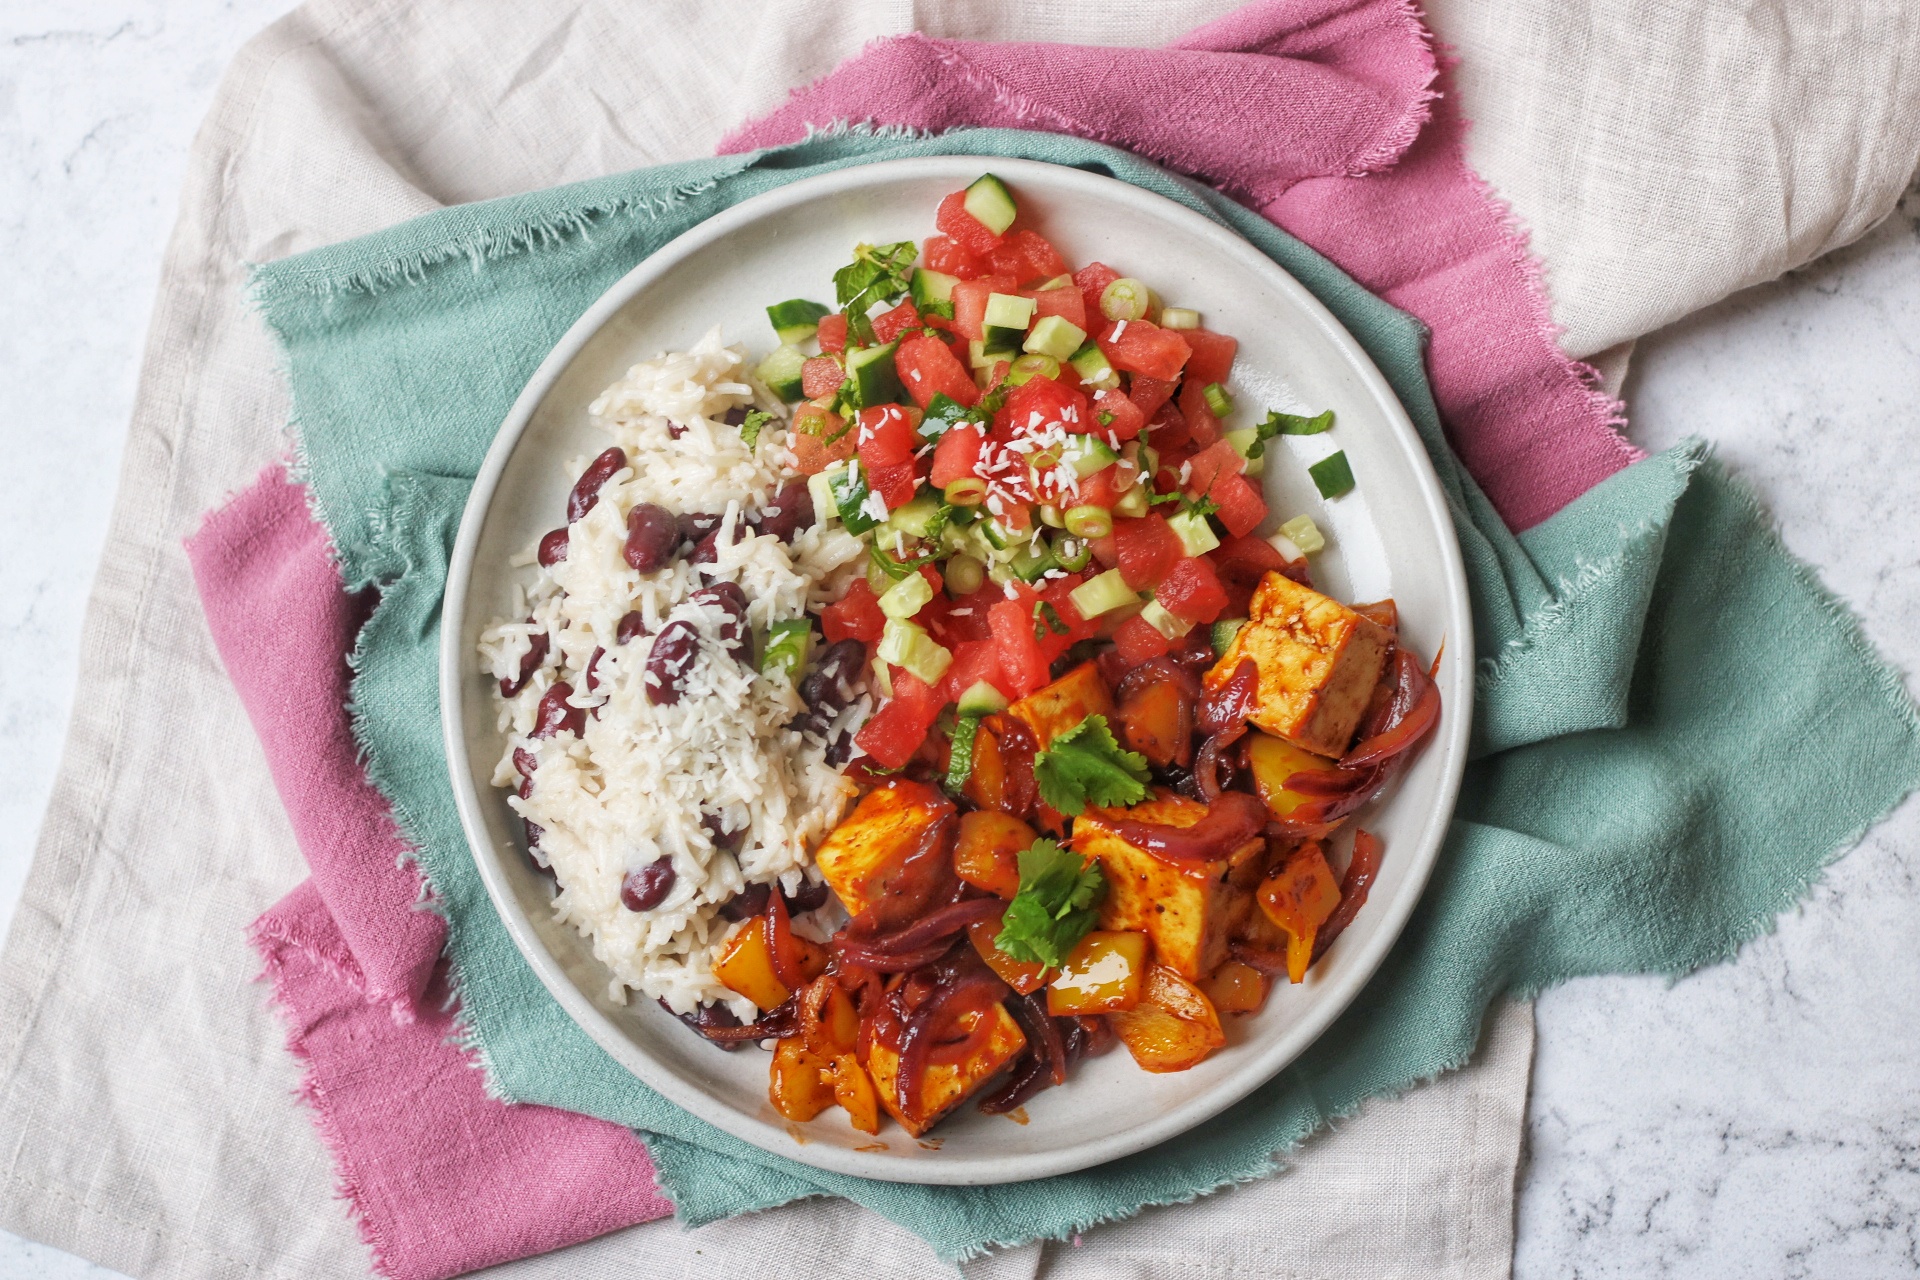 Jerk Tofu with Rice and Beans and a Watermelon Salsa